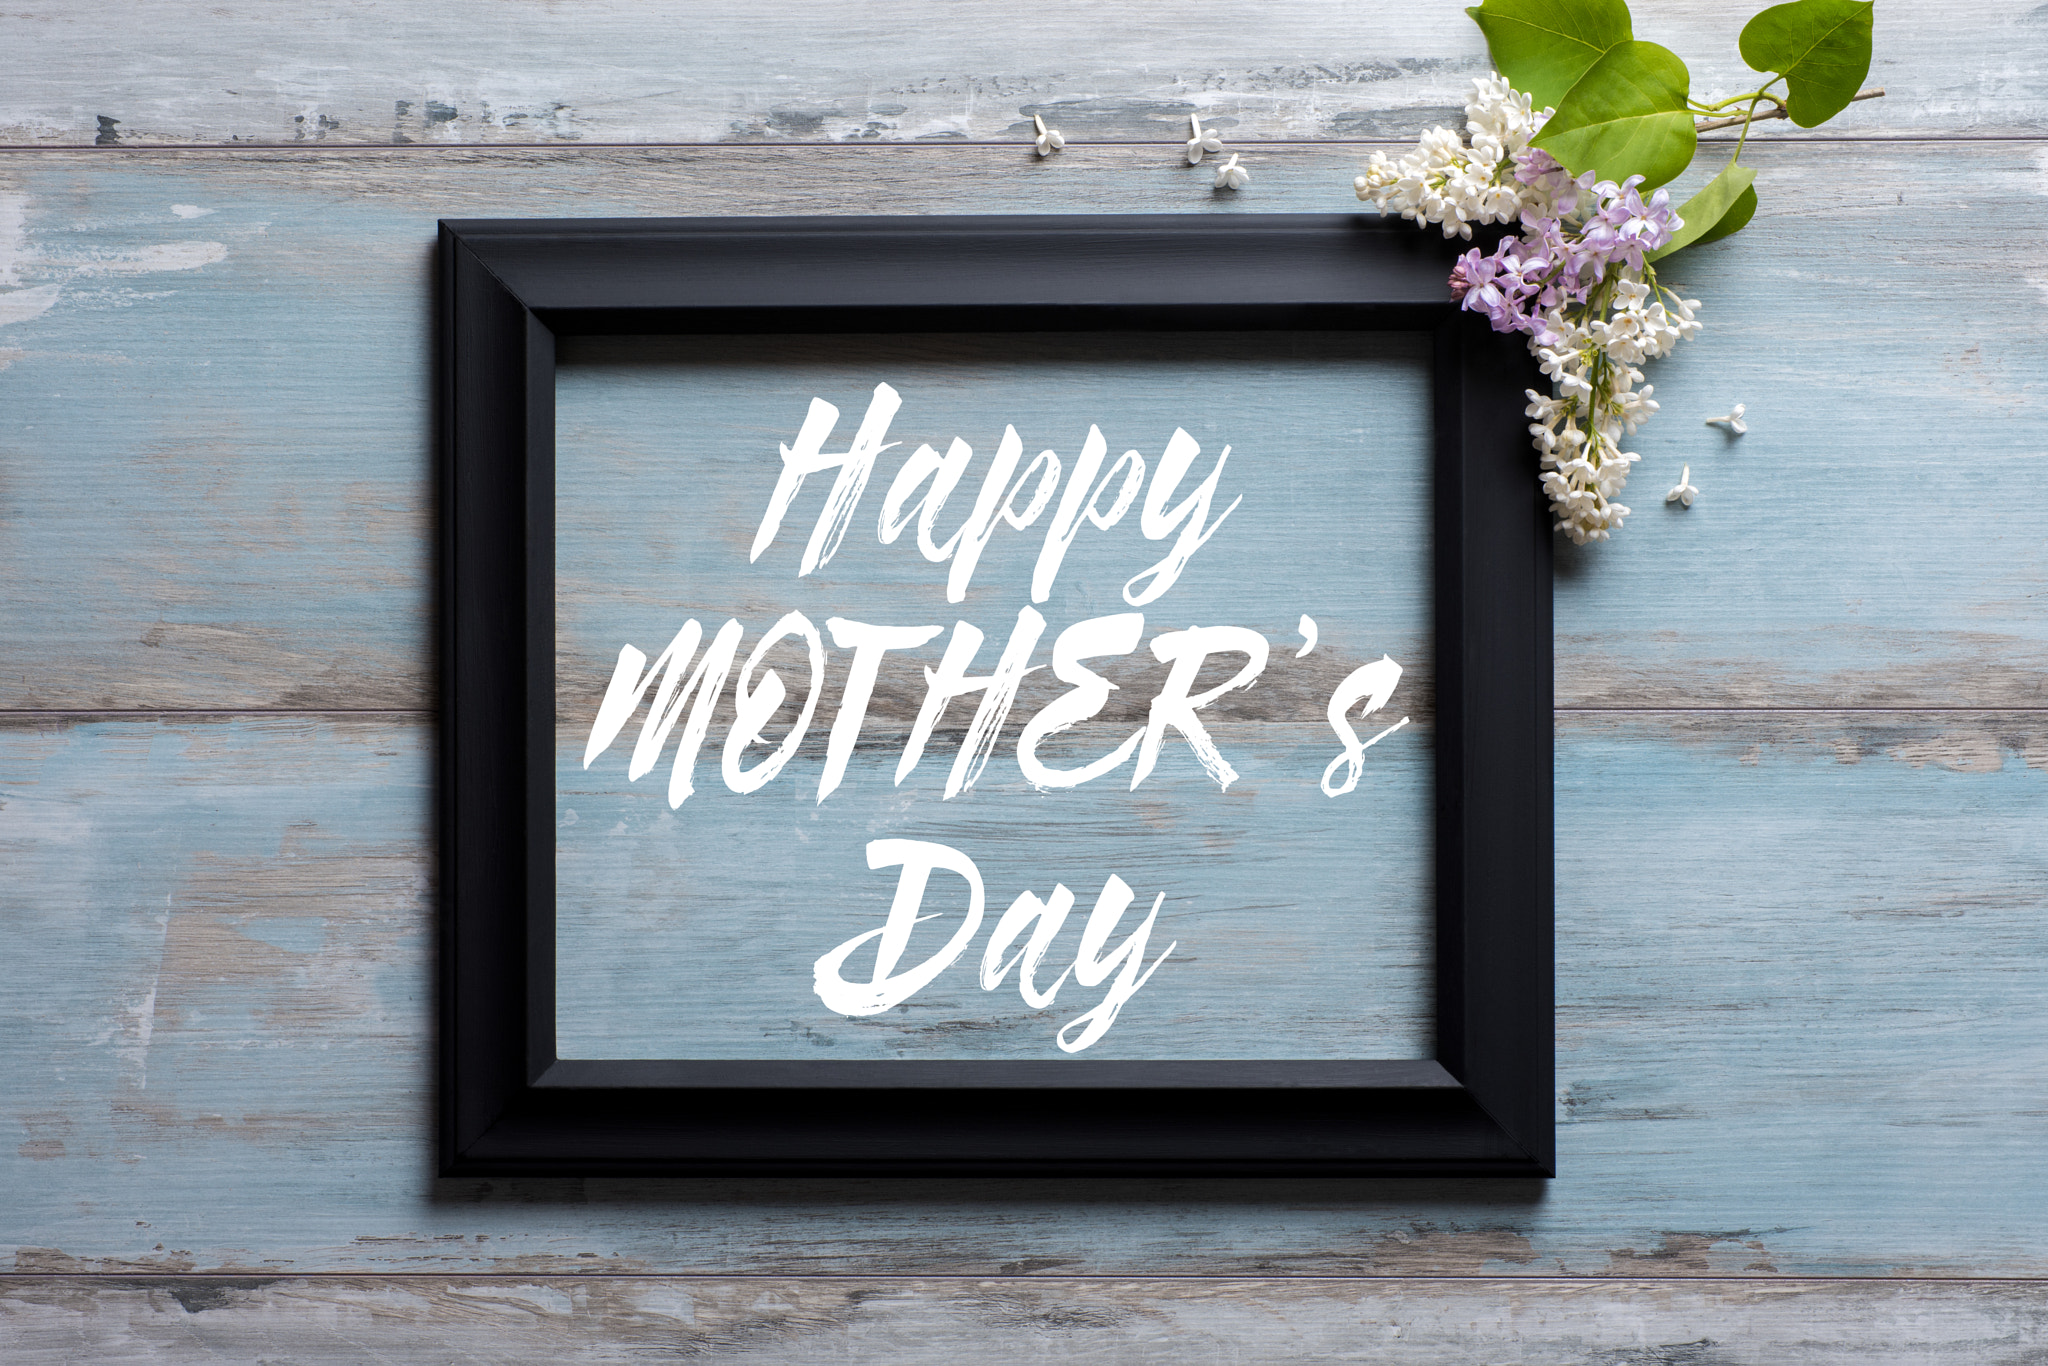 Nikon D810 sample photo. Picture frame with lilac flowers and happy mother's day message on blue wooden background photography